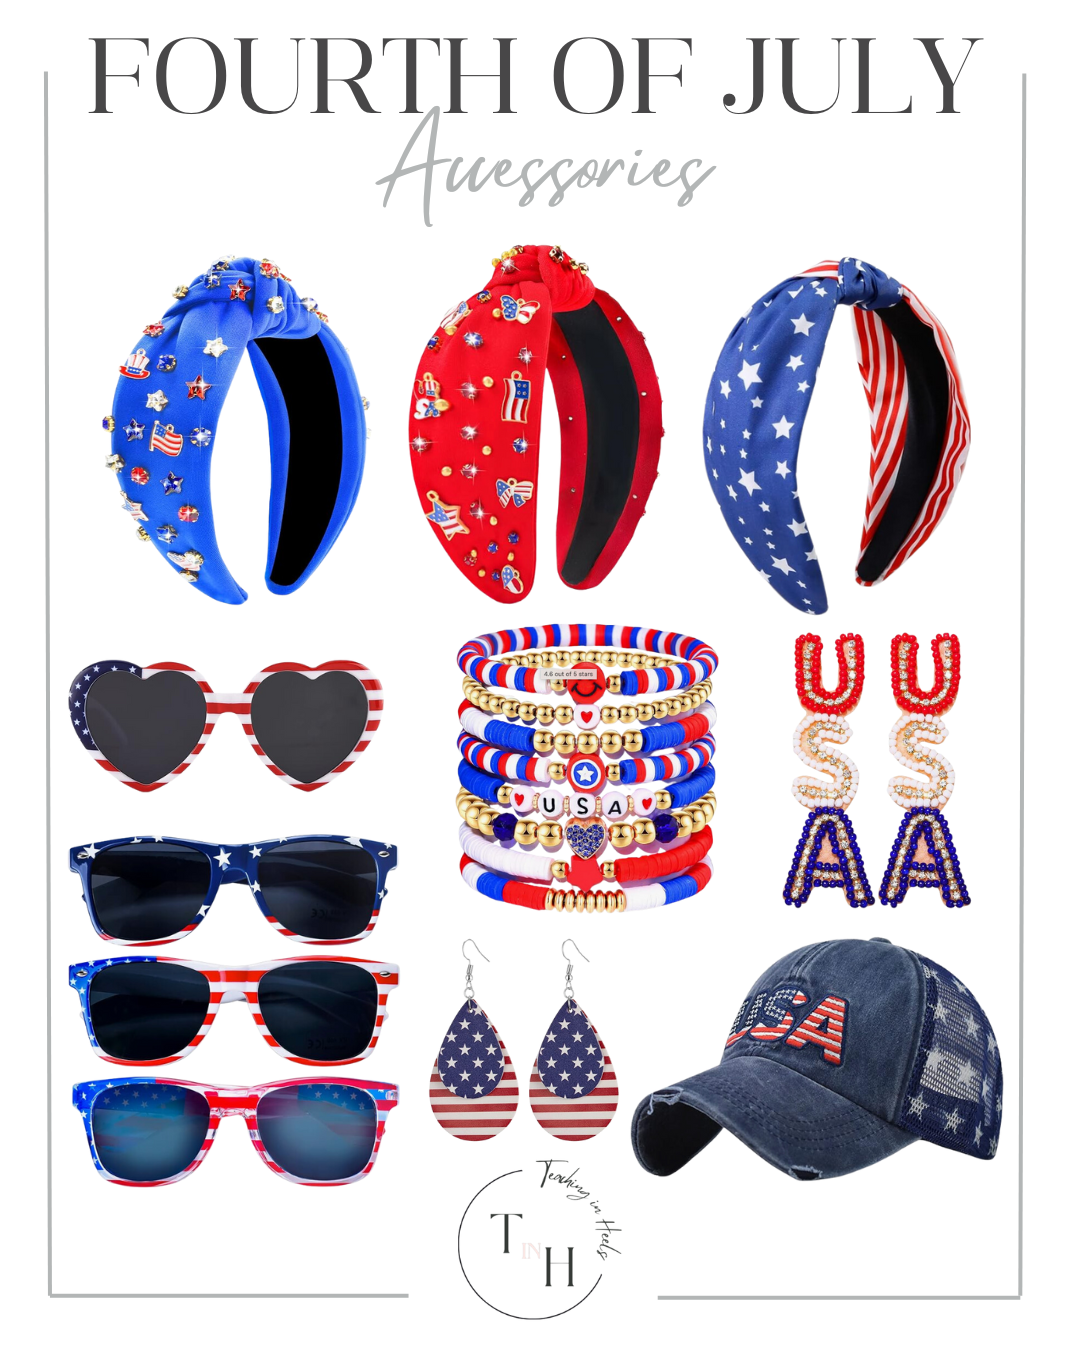 4th of July Style Guide: Must-Have Outfits & Essentials

fourth of july, summer, summer outfit, summer fashion, outdoor hosting, summer accessories, americana style, americana accessories, amazon